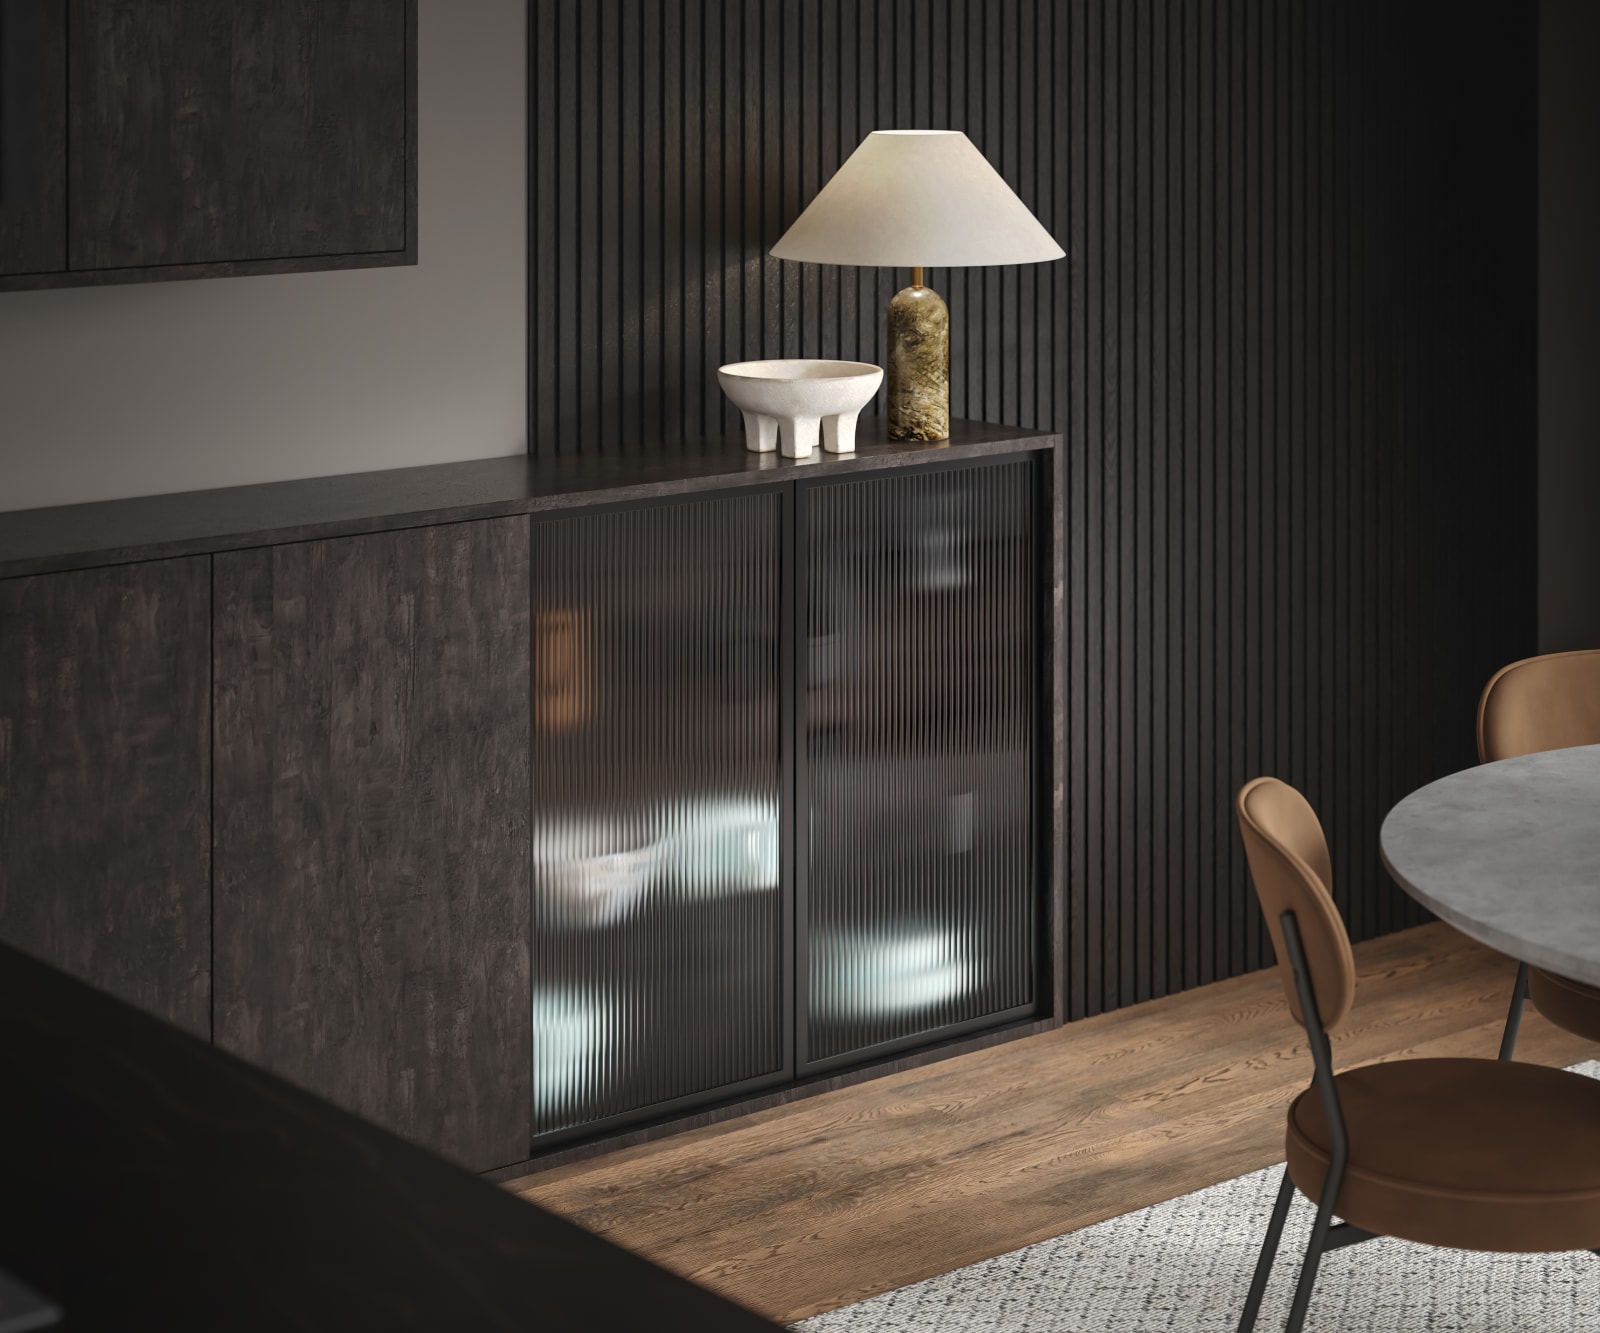 Contemporary clean lines and organic woodgrain texture combined with display cabinets with fluted glass doors.